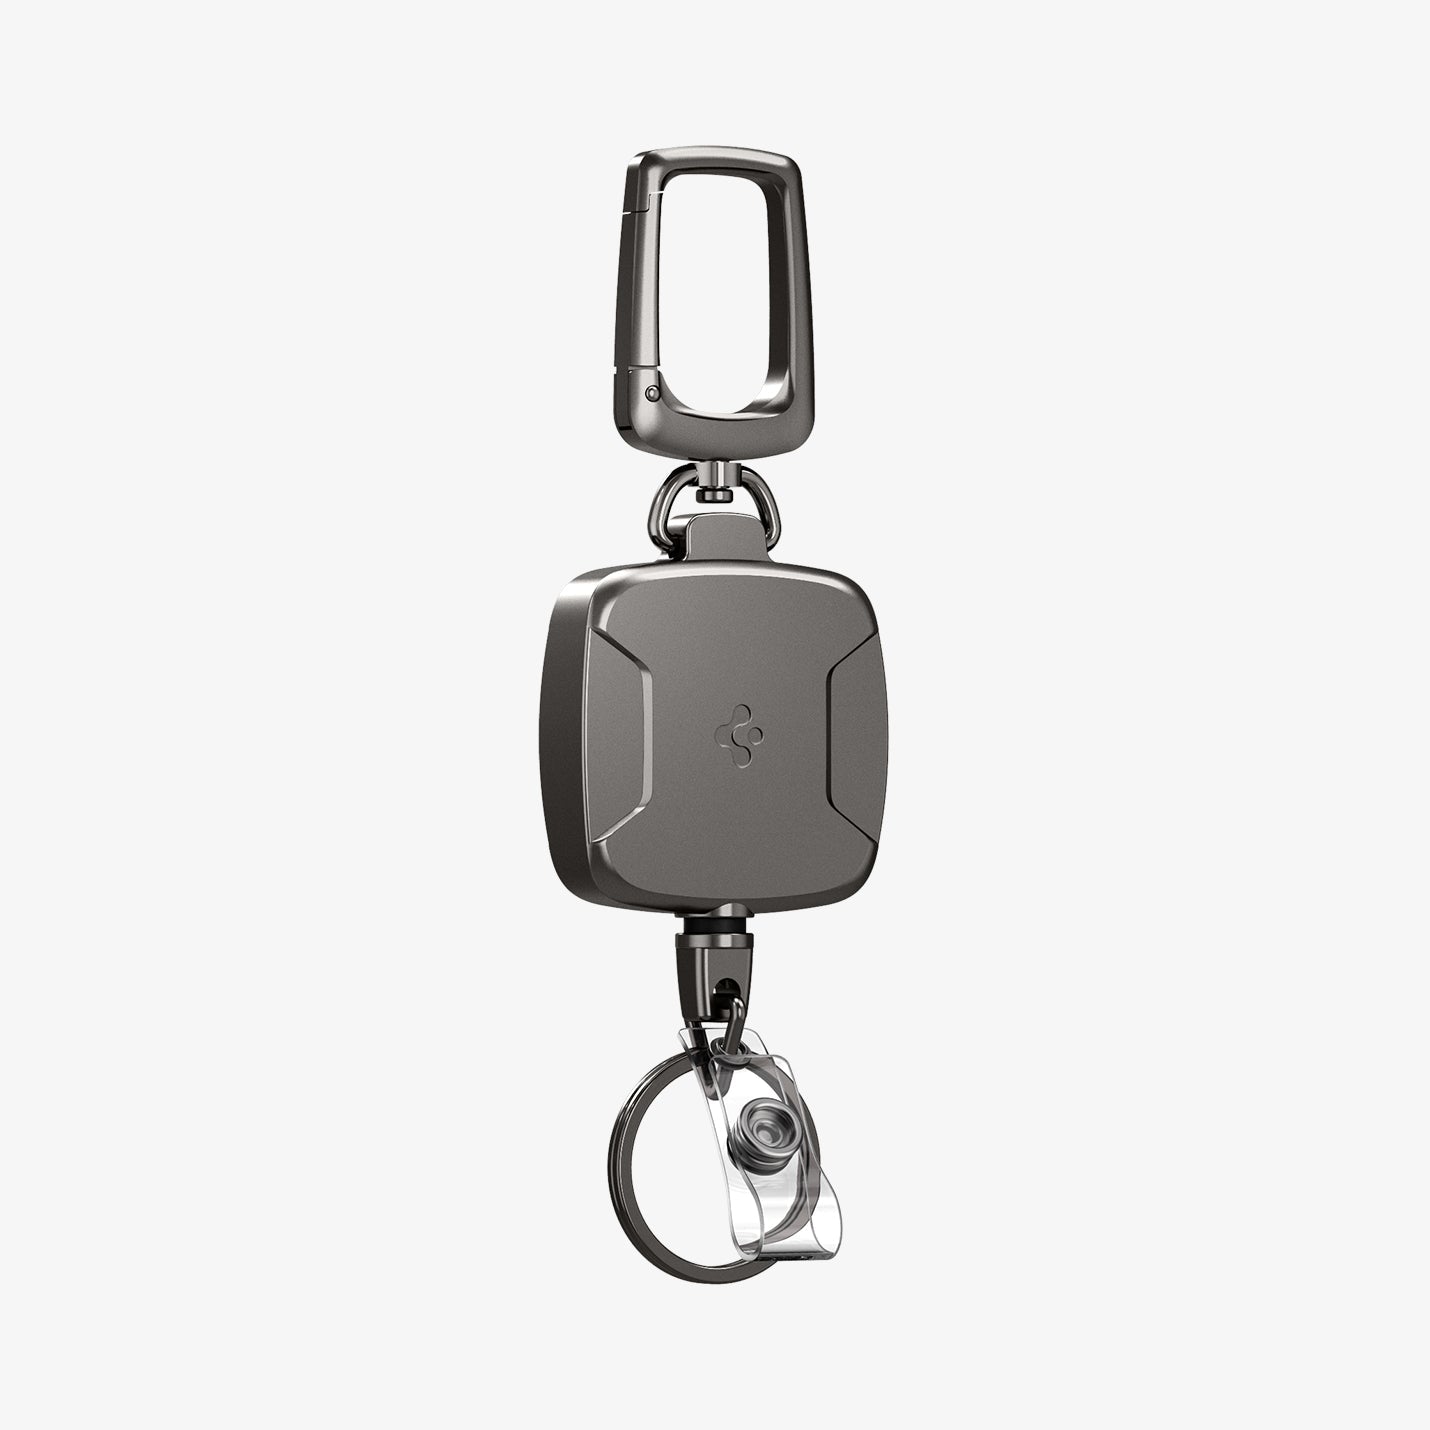 AHP03019 - Carabiner Reel Clip in black showing the front and partial side